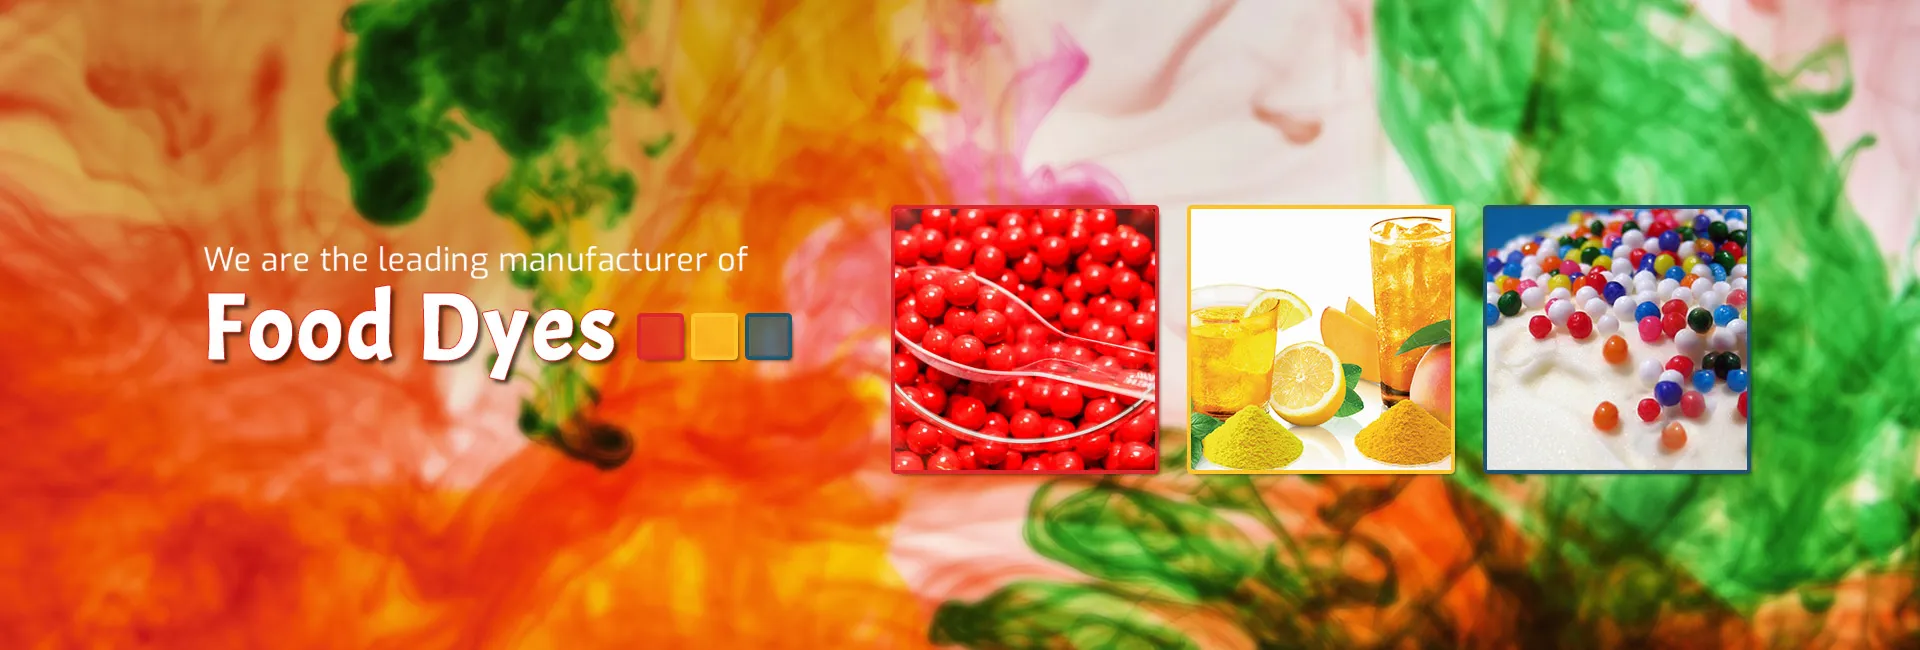 Food Dyes Manufacturer & Suppliers in Japan